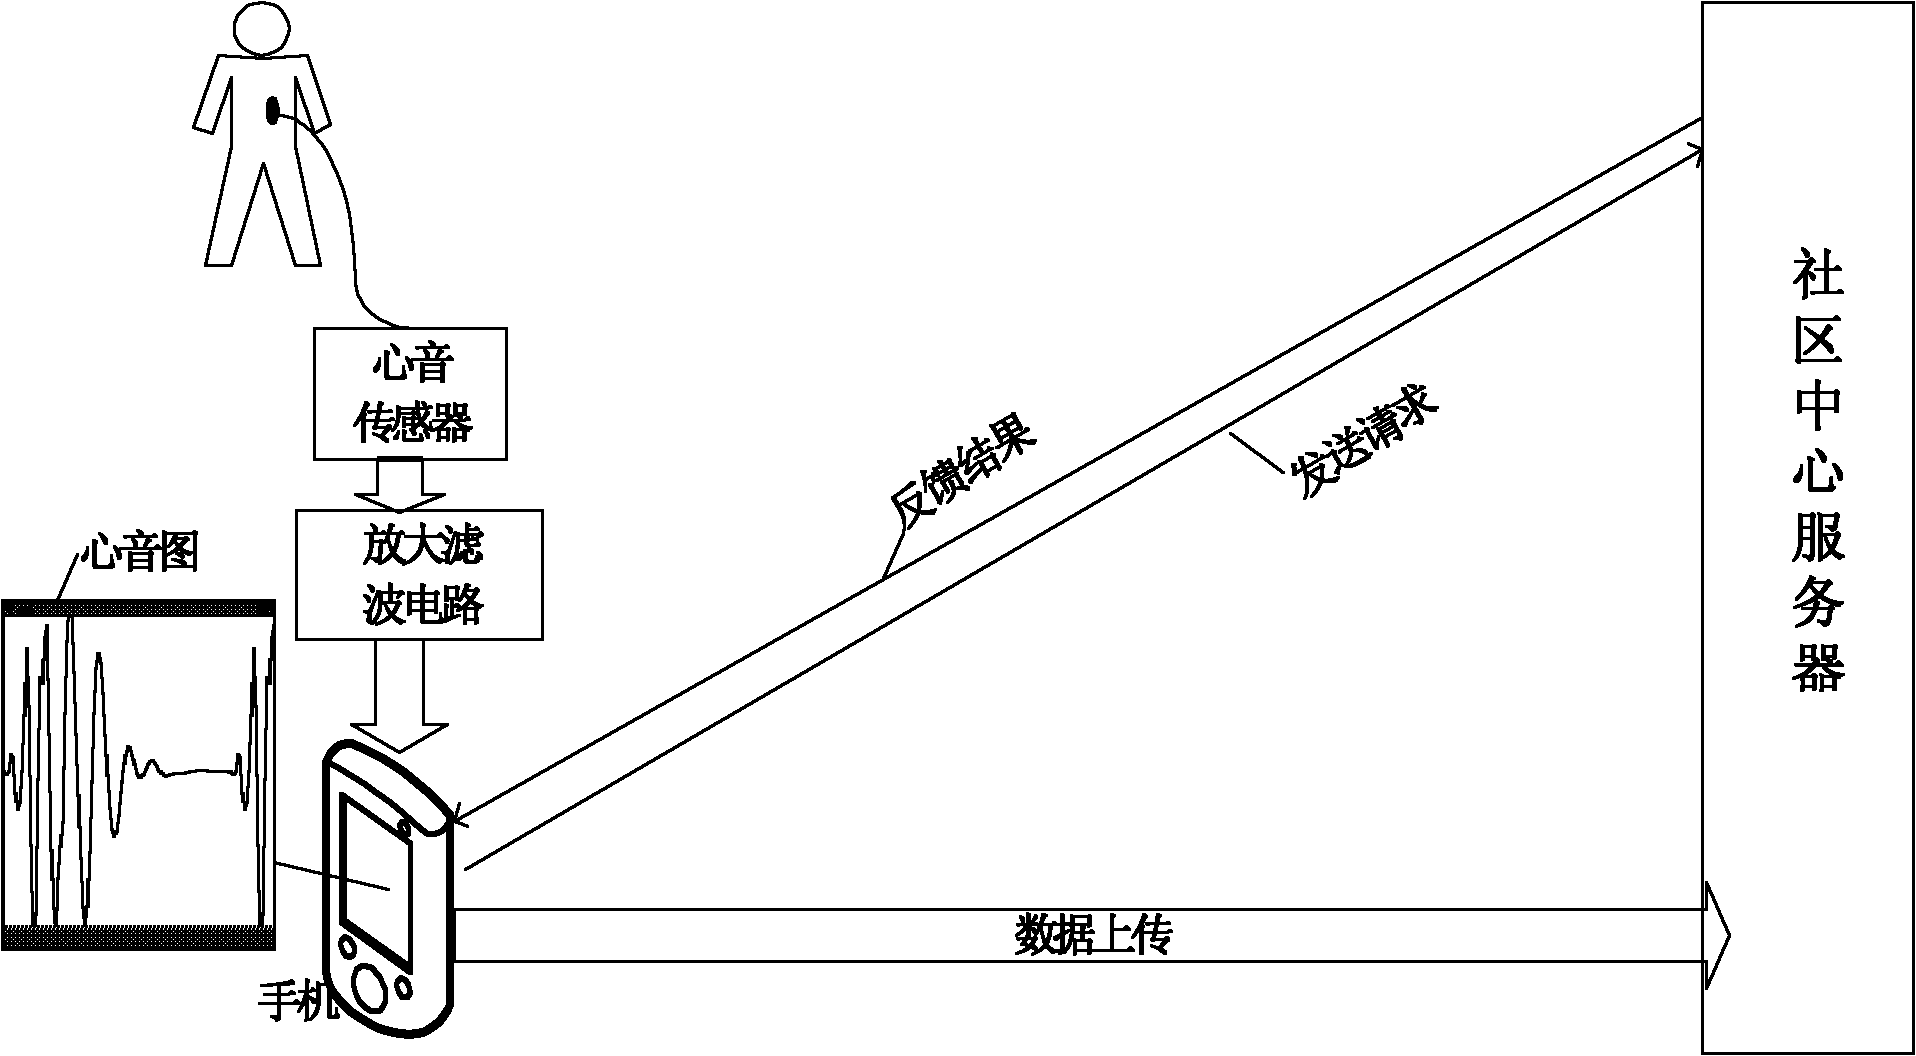 System and method for detecting mobile phone cardiac sound based on earphone interface